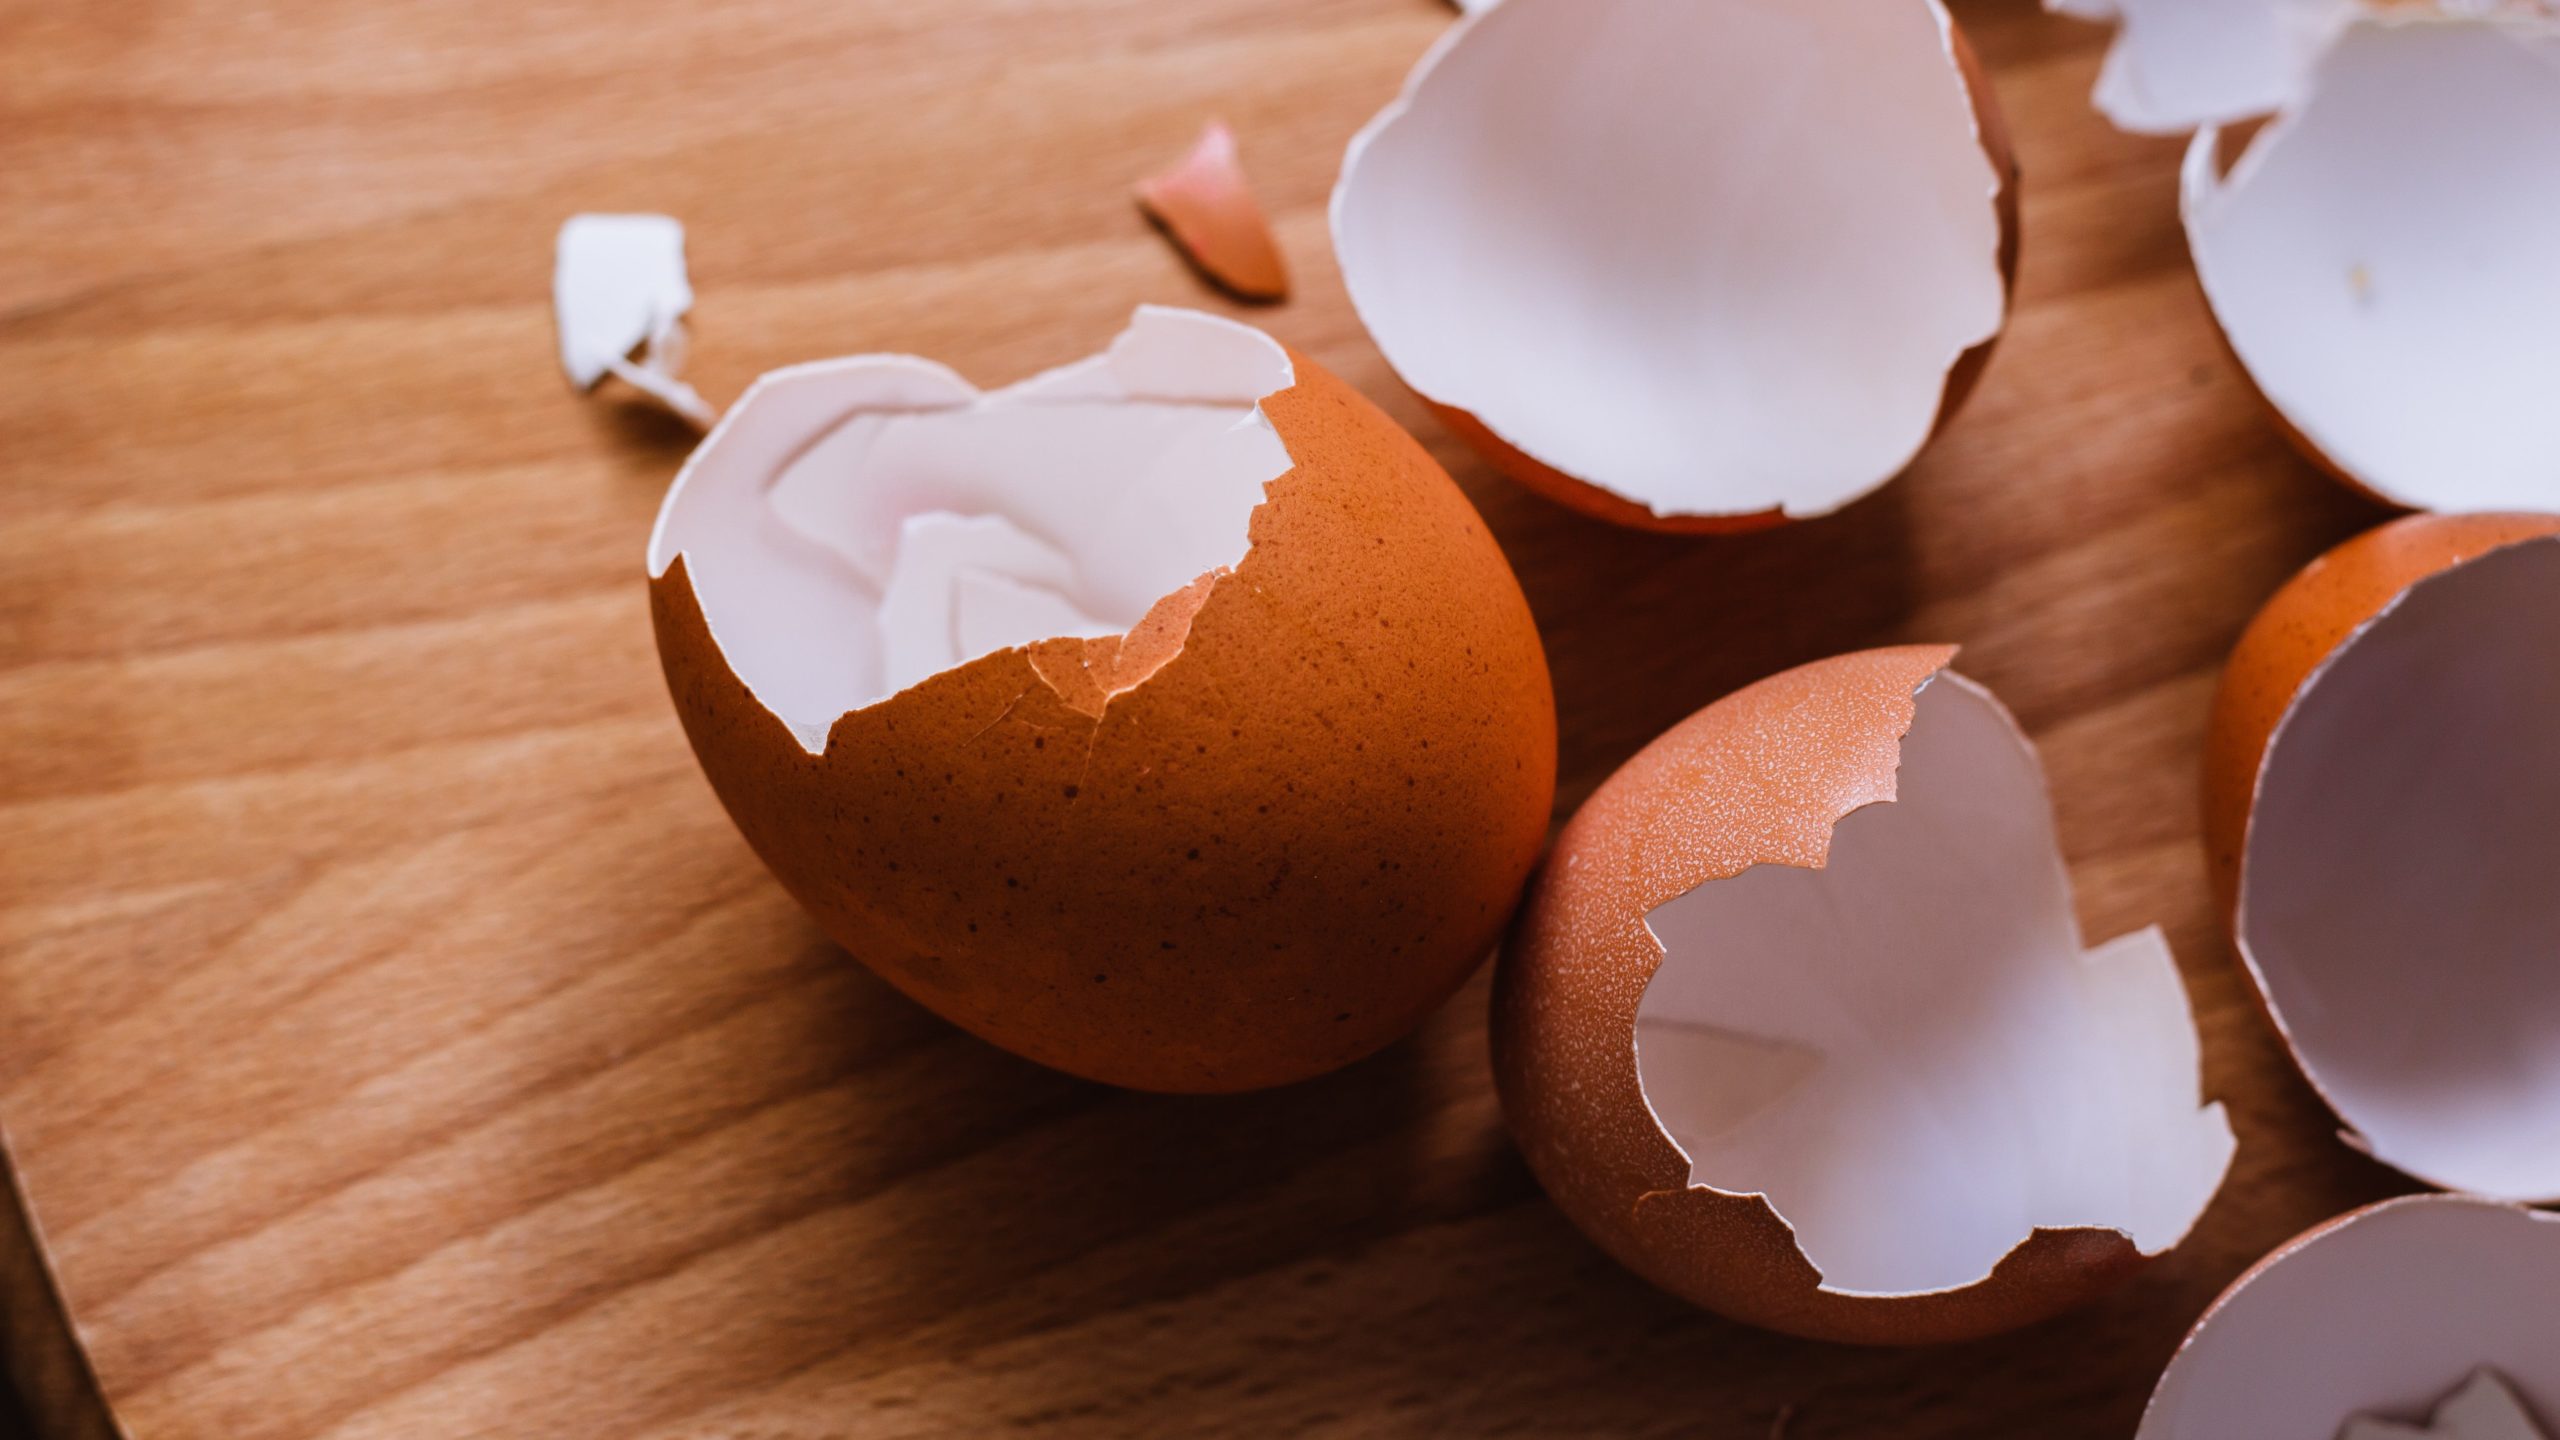 Why You Should Never Put Eggshells Back in the Carton